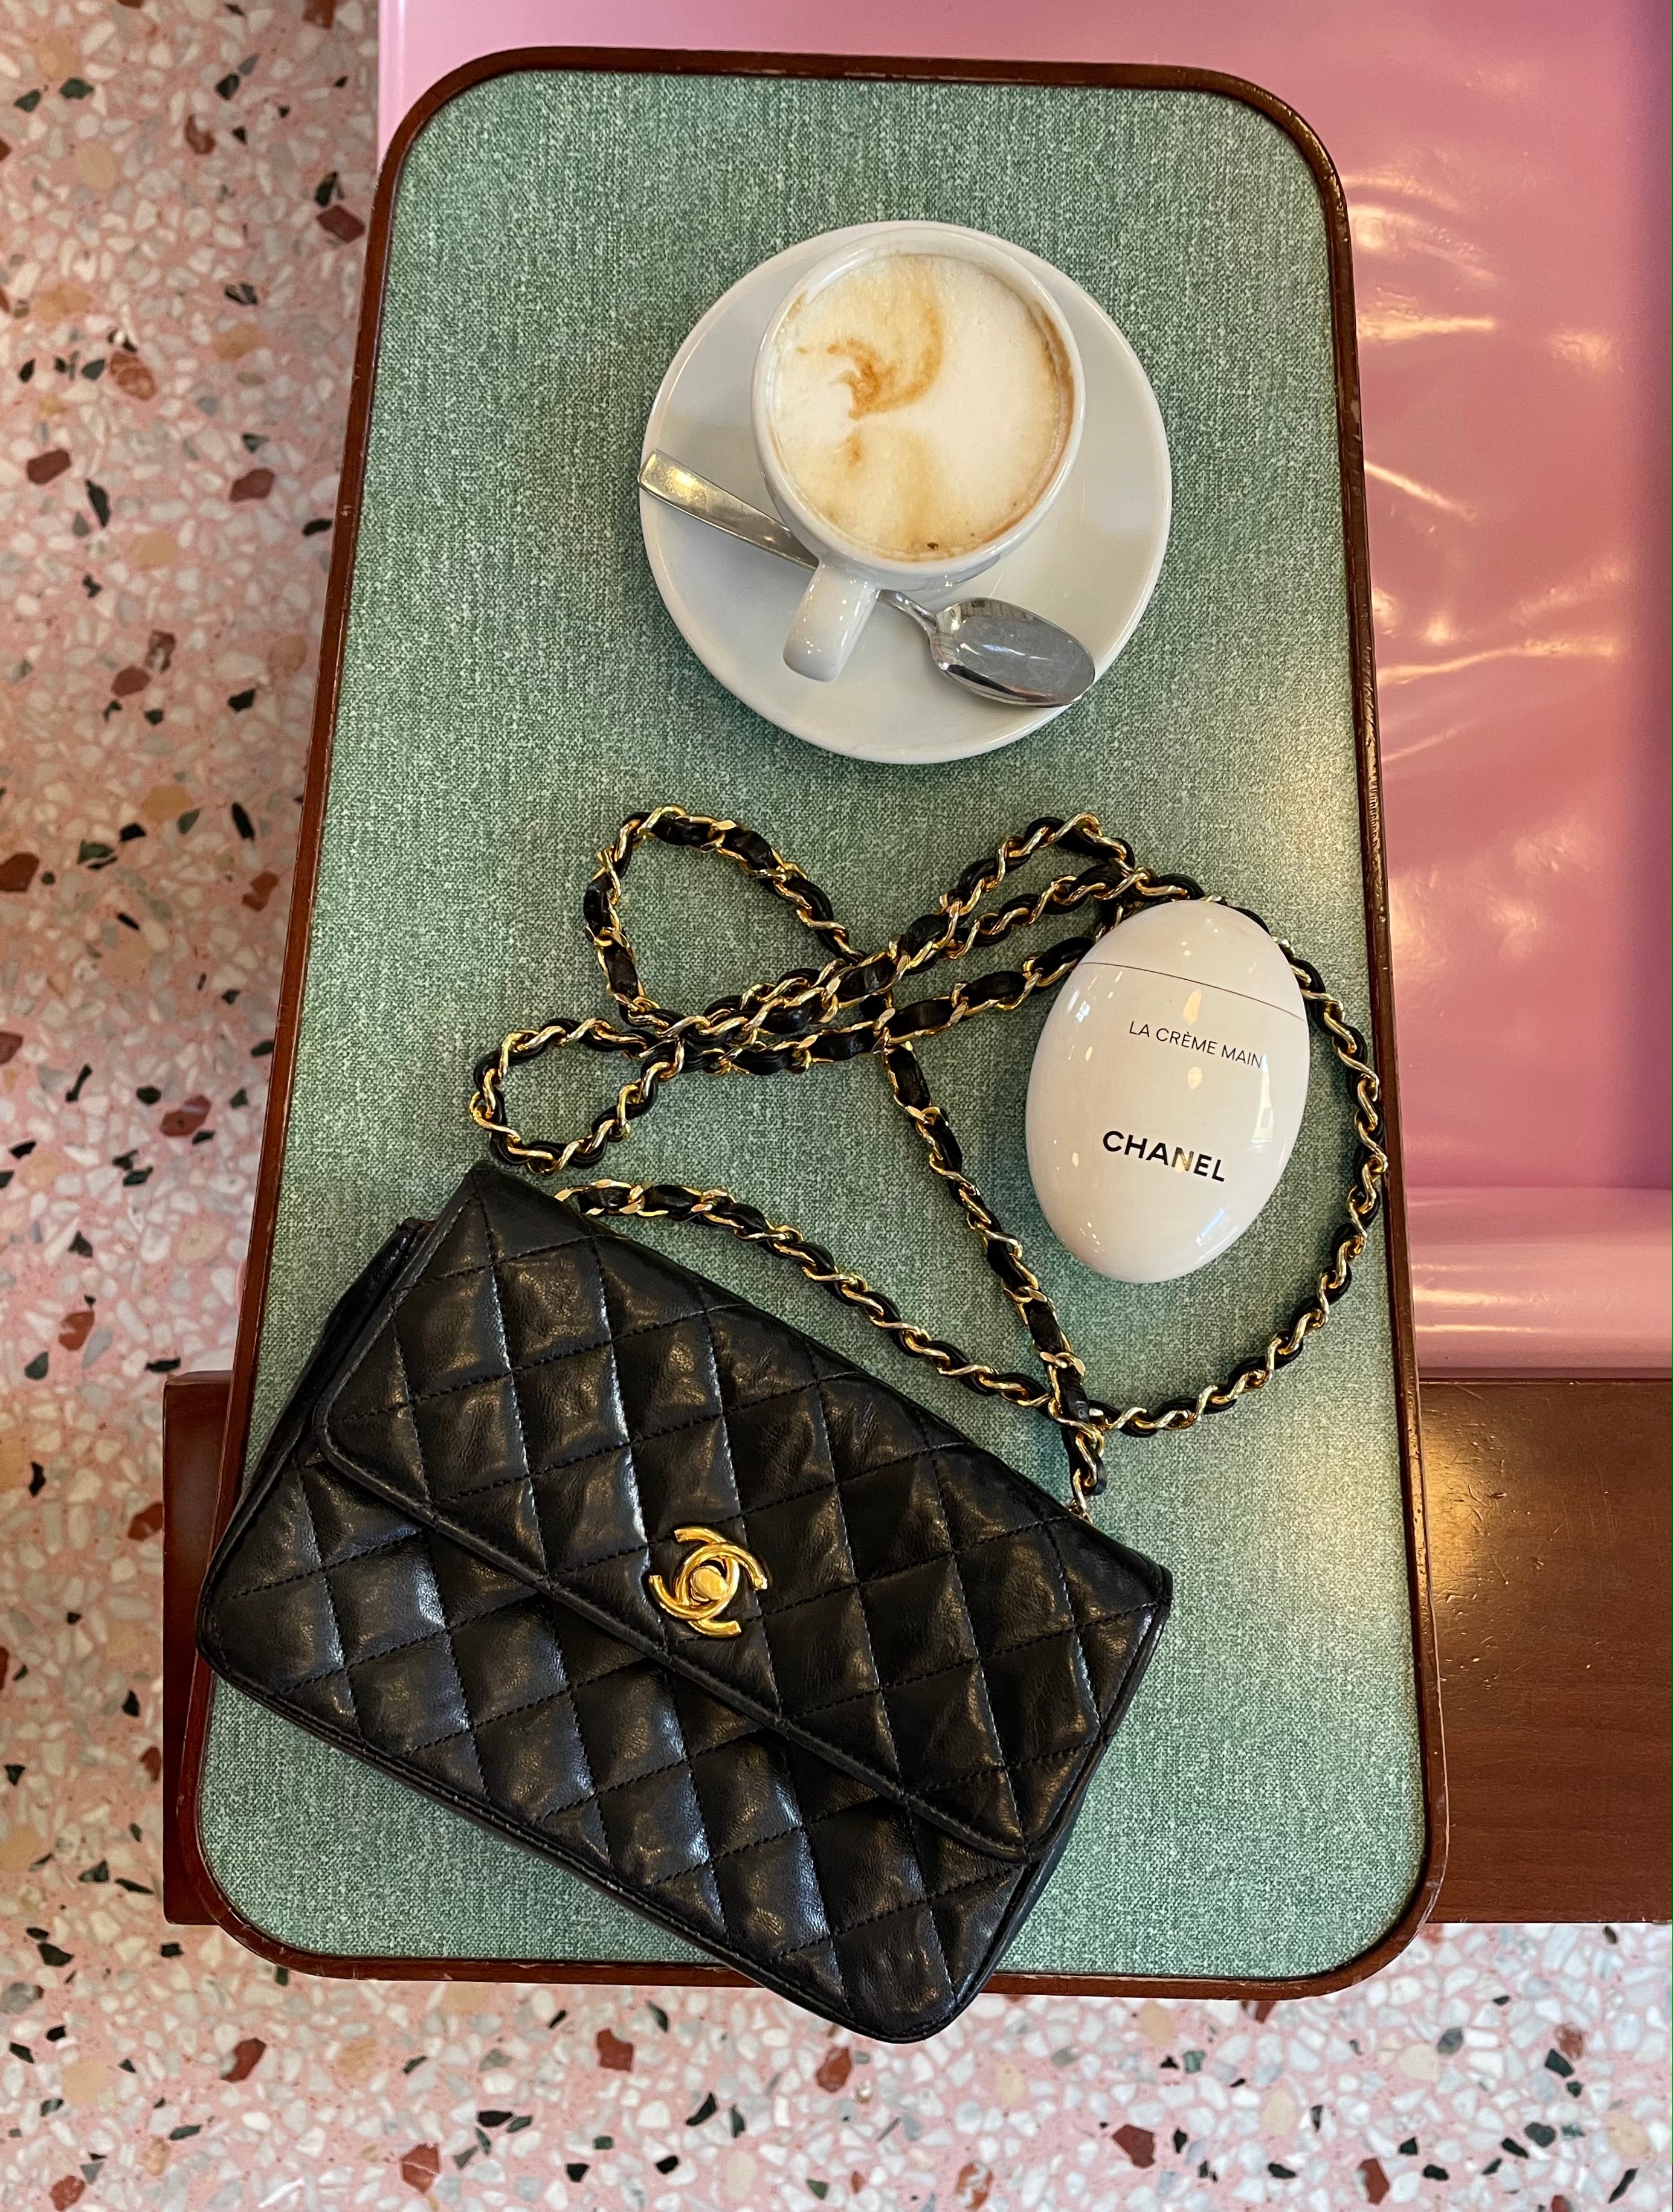 Could Chanel bag be the next exclusive luxury piece? by Valeria Boi